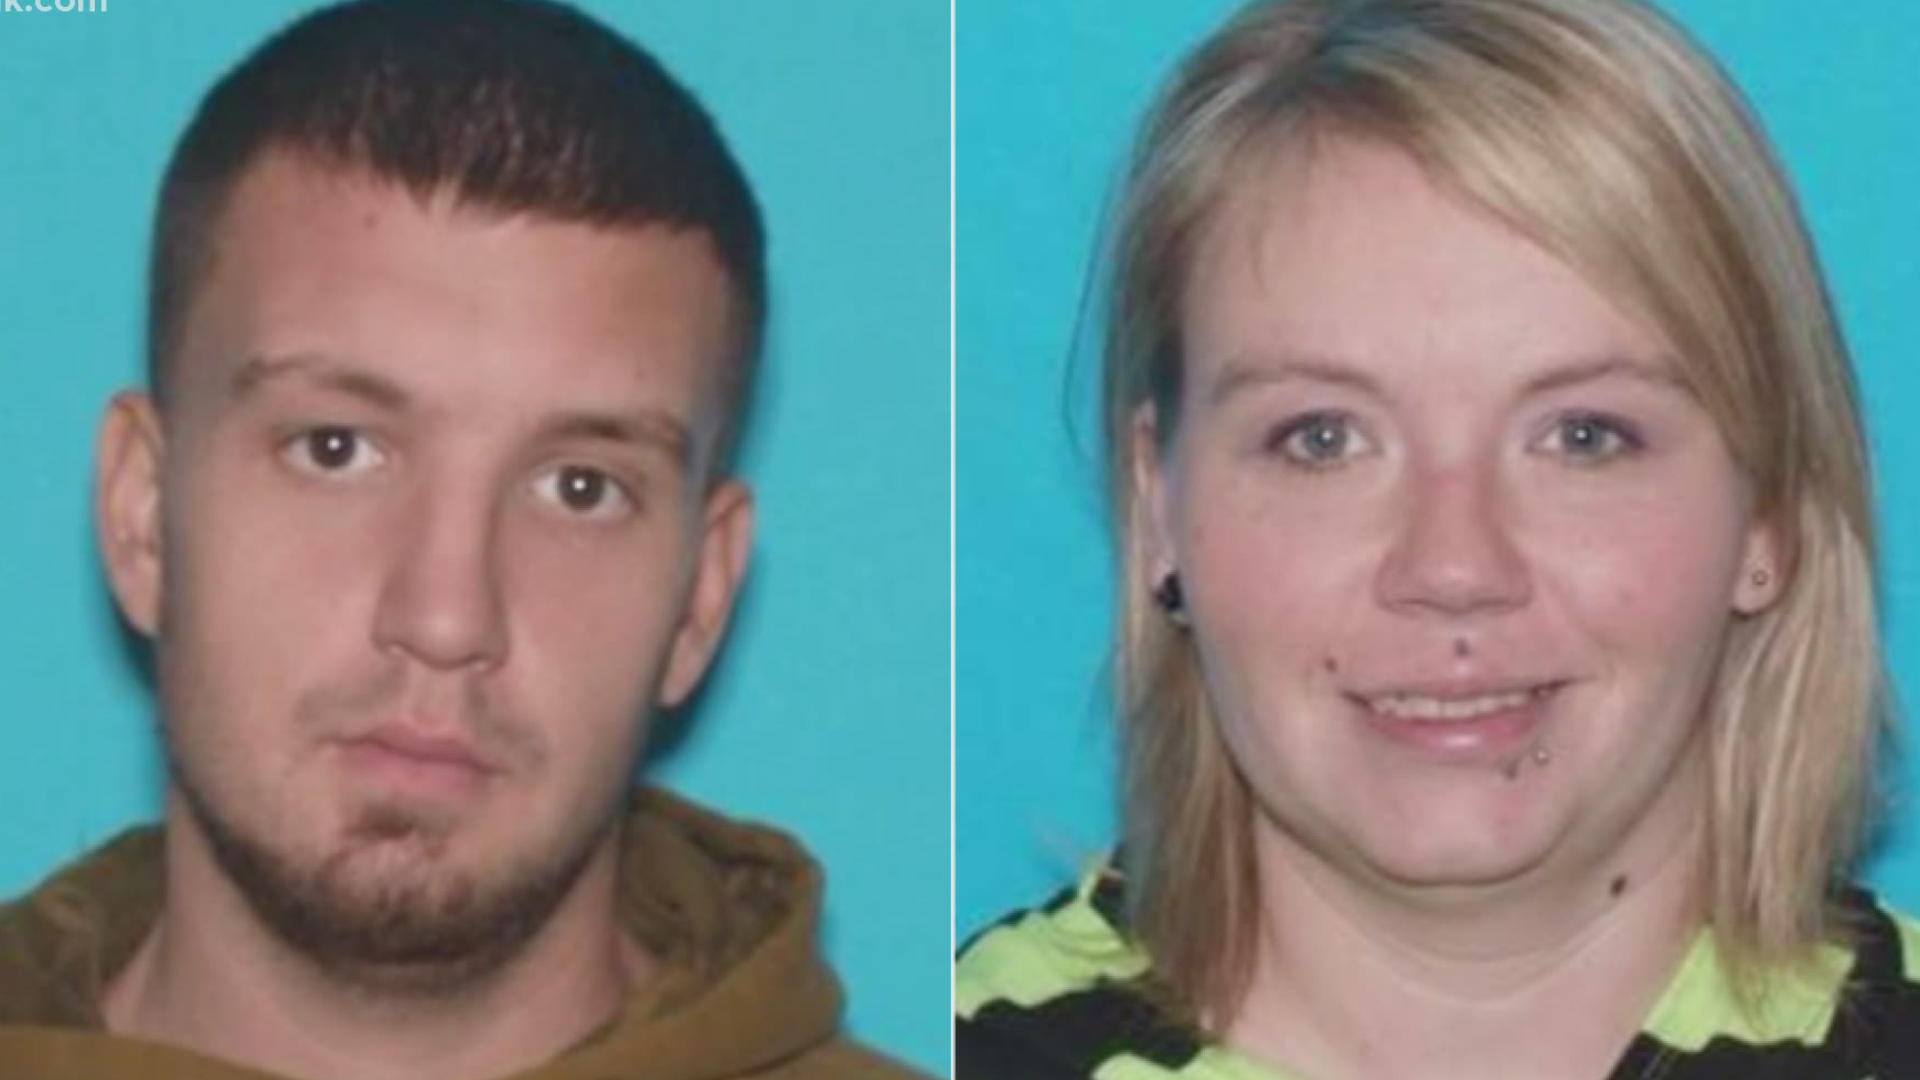 Major Case Squad investigators are looking for 24-year-old Alex B. Kresting and 41-year-old Monica L. Deroy